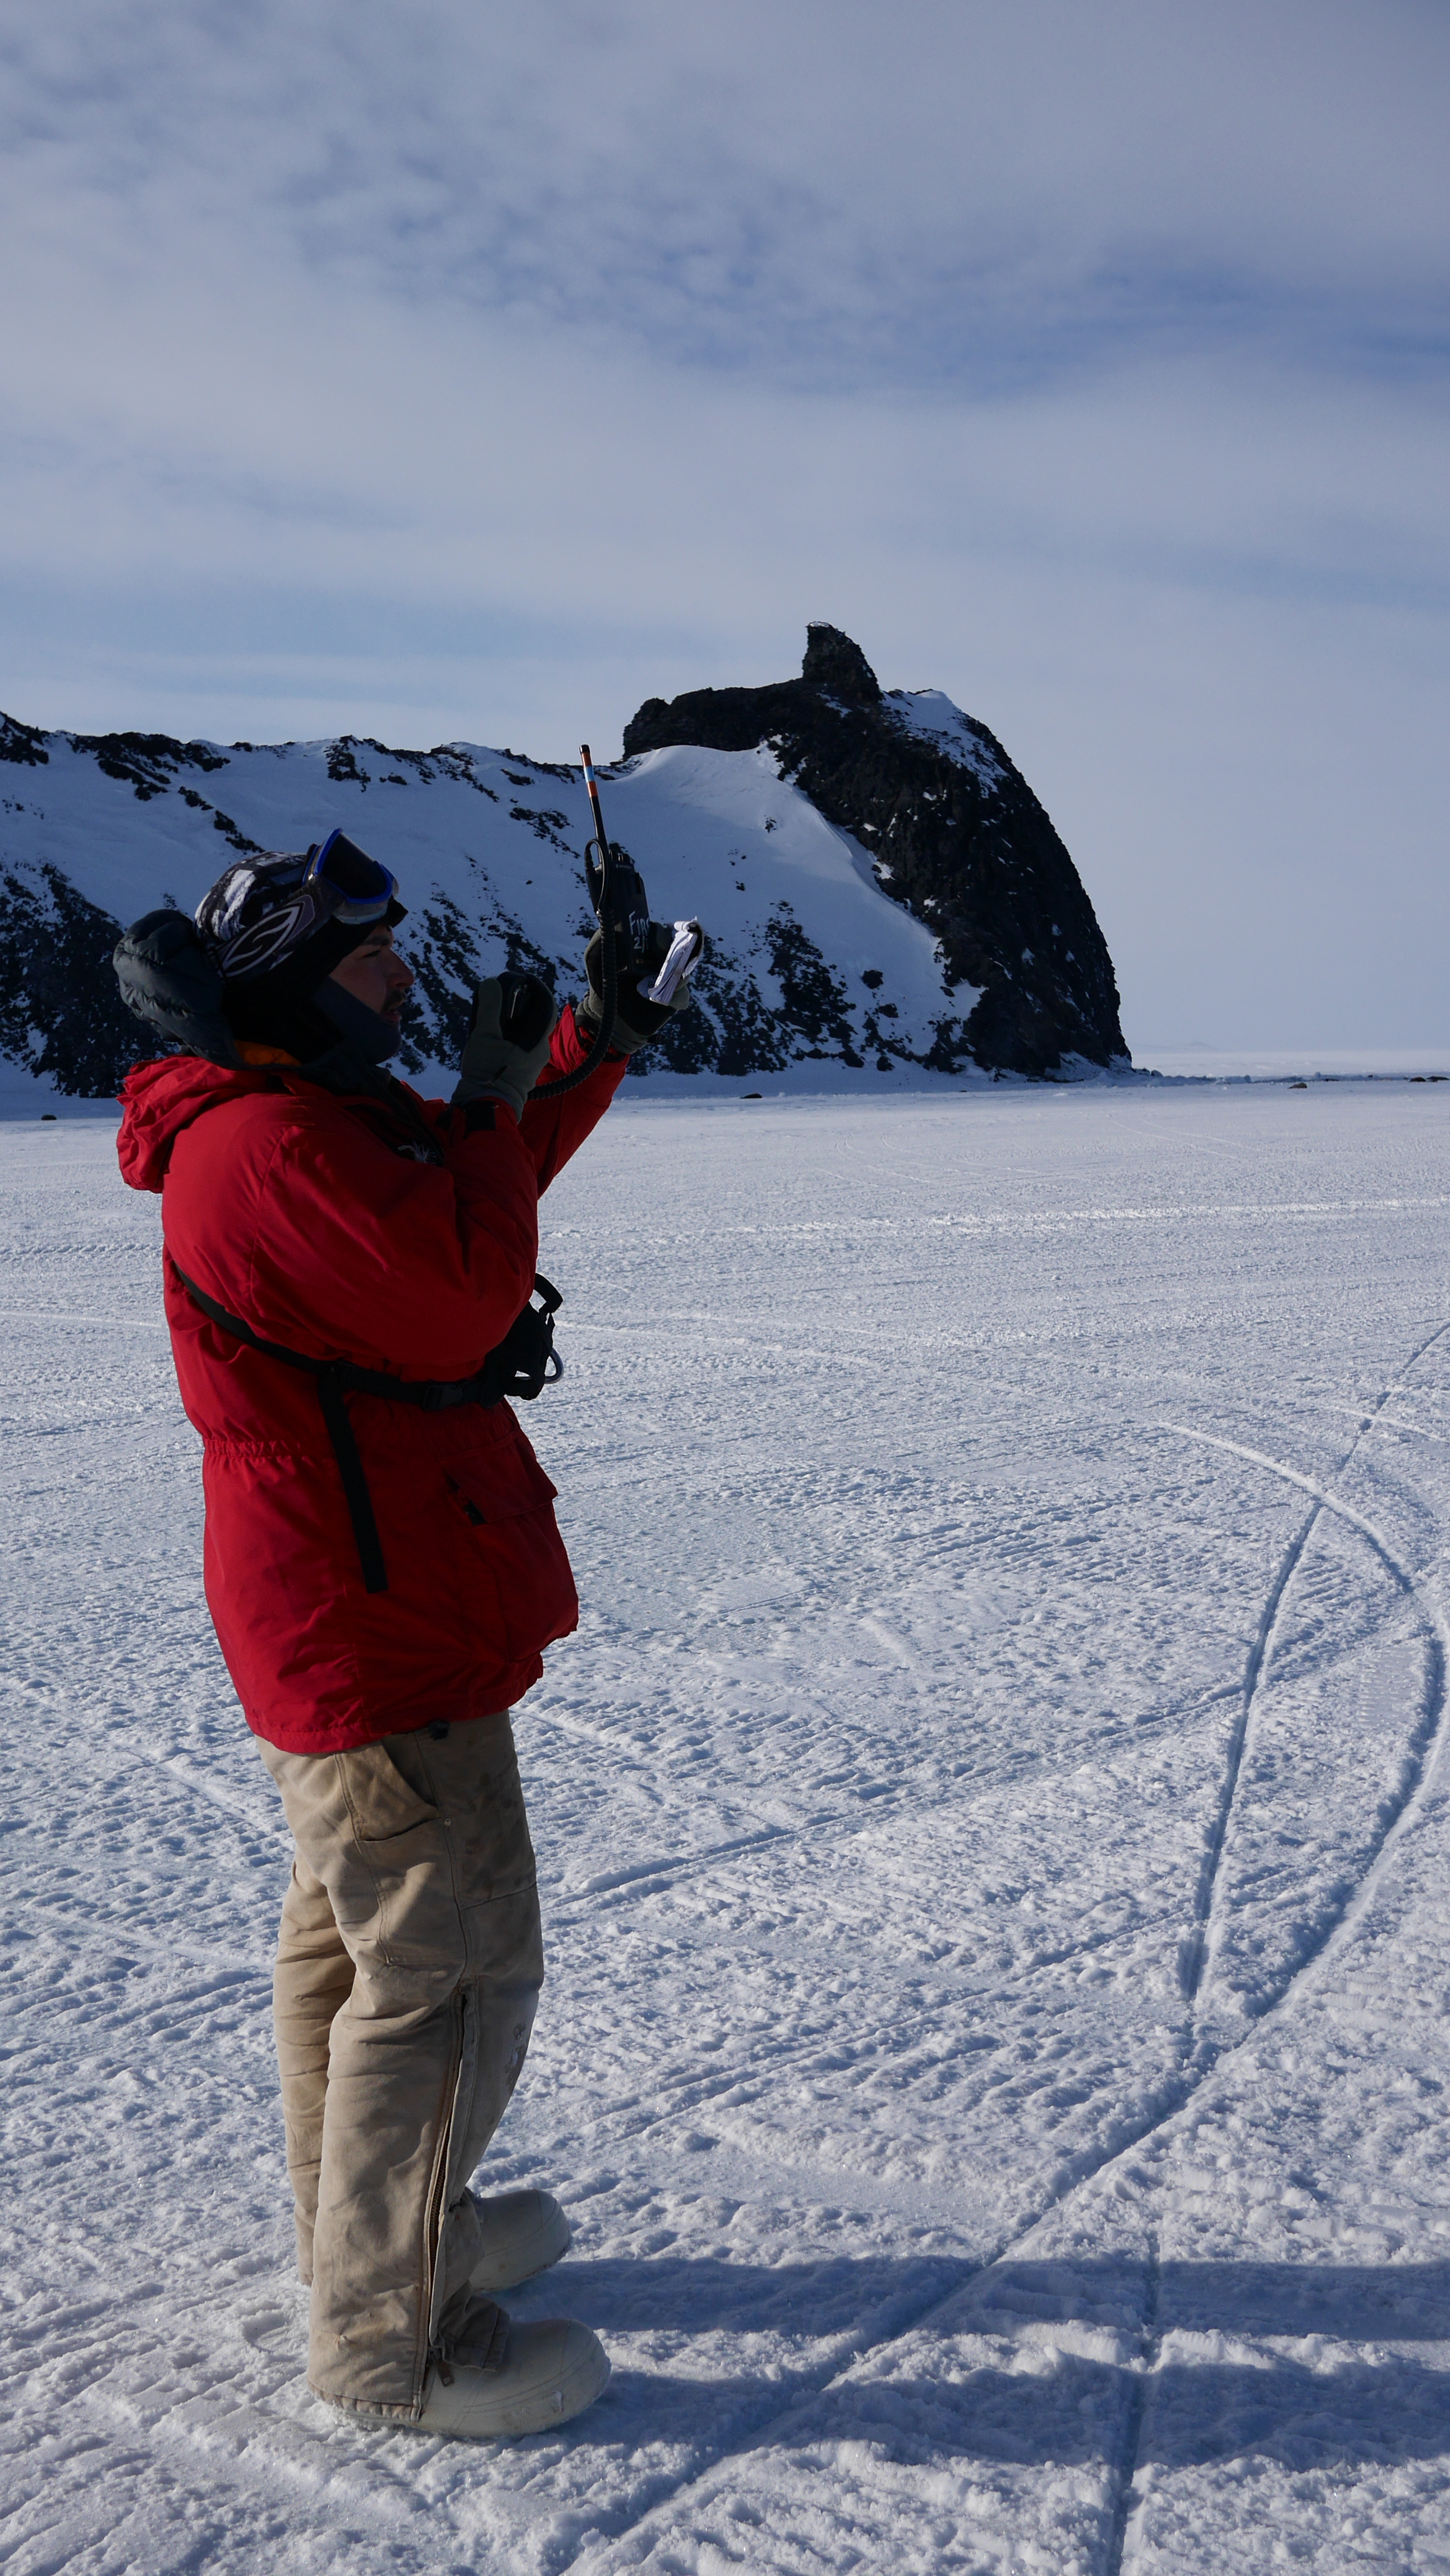 Shane Petch on ice in Antarctica.